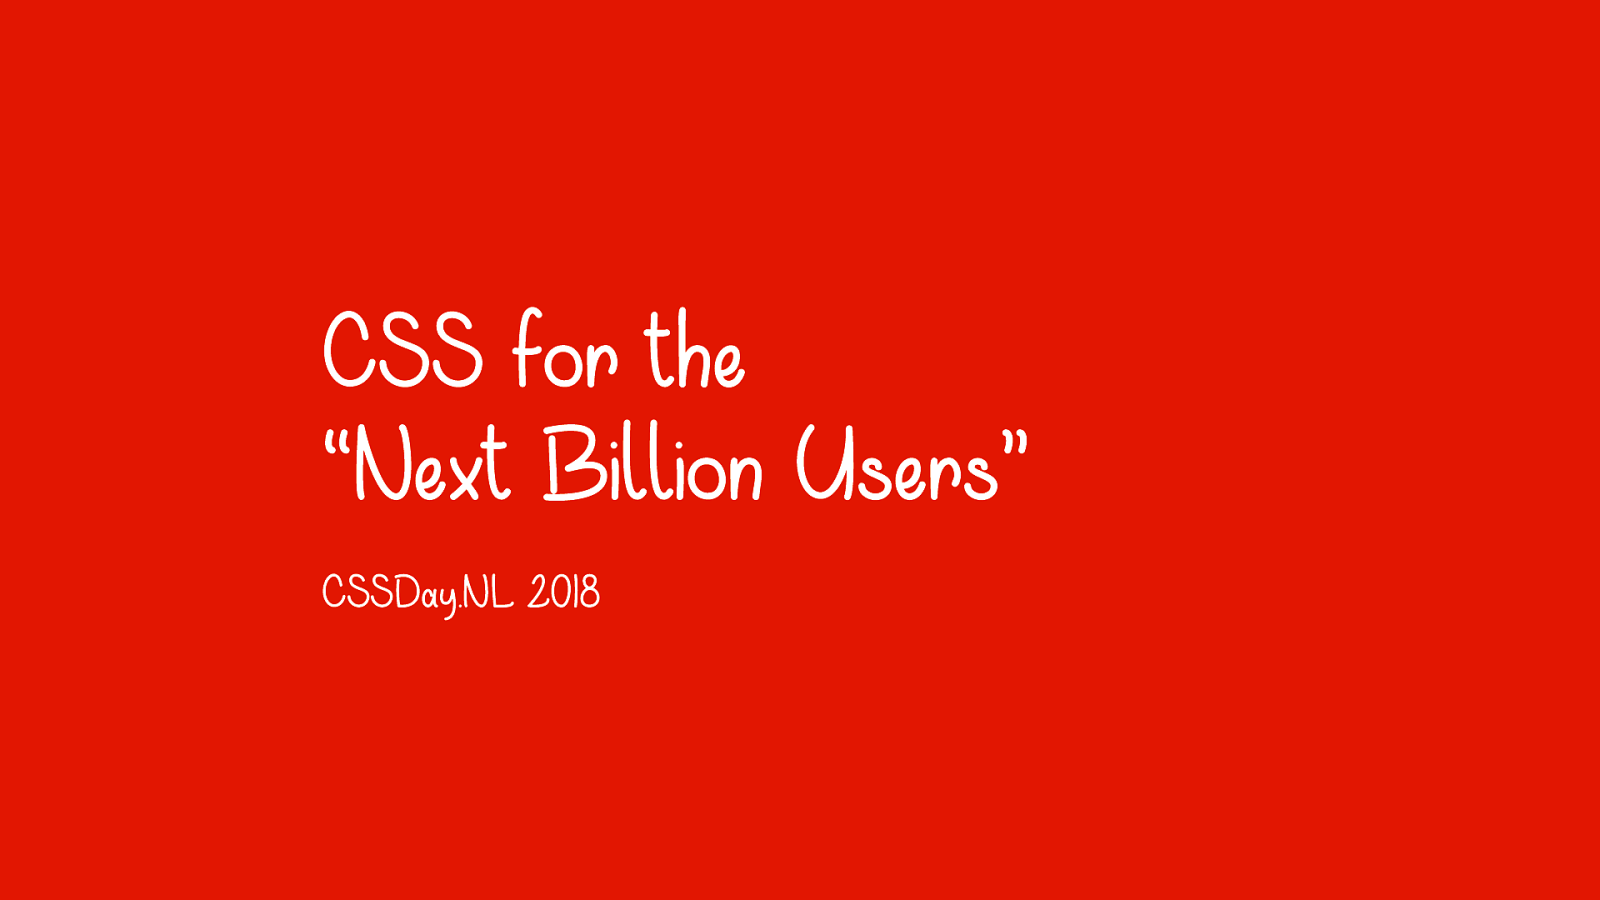 CSS for the Next Billion Users